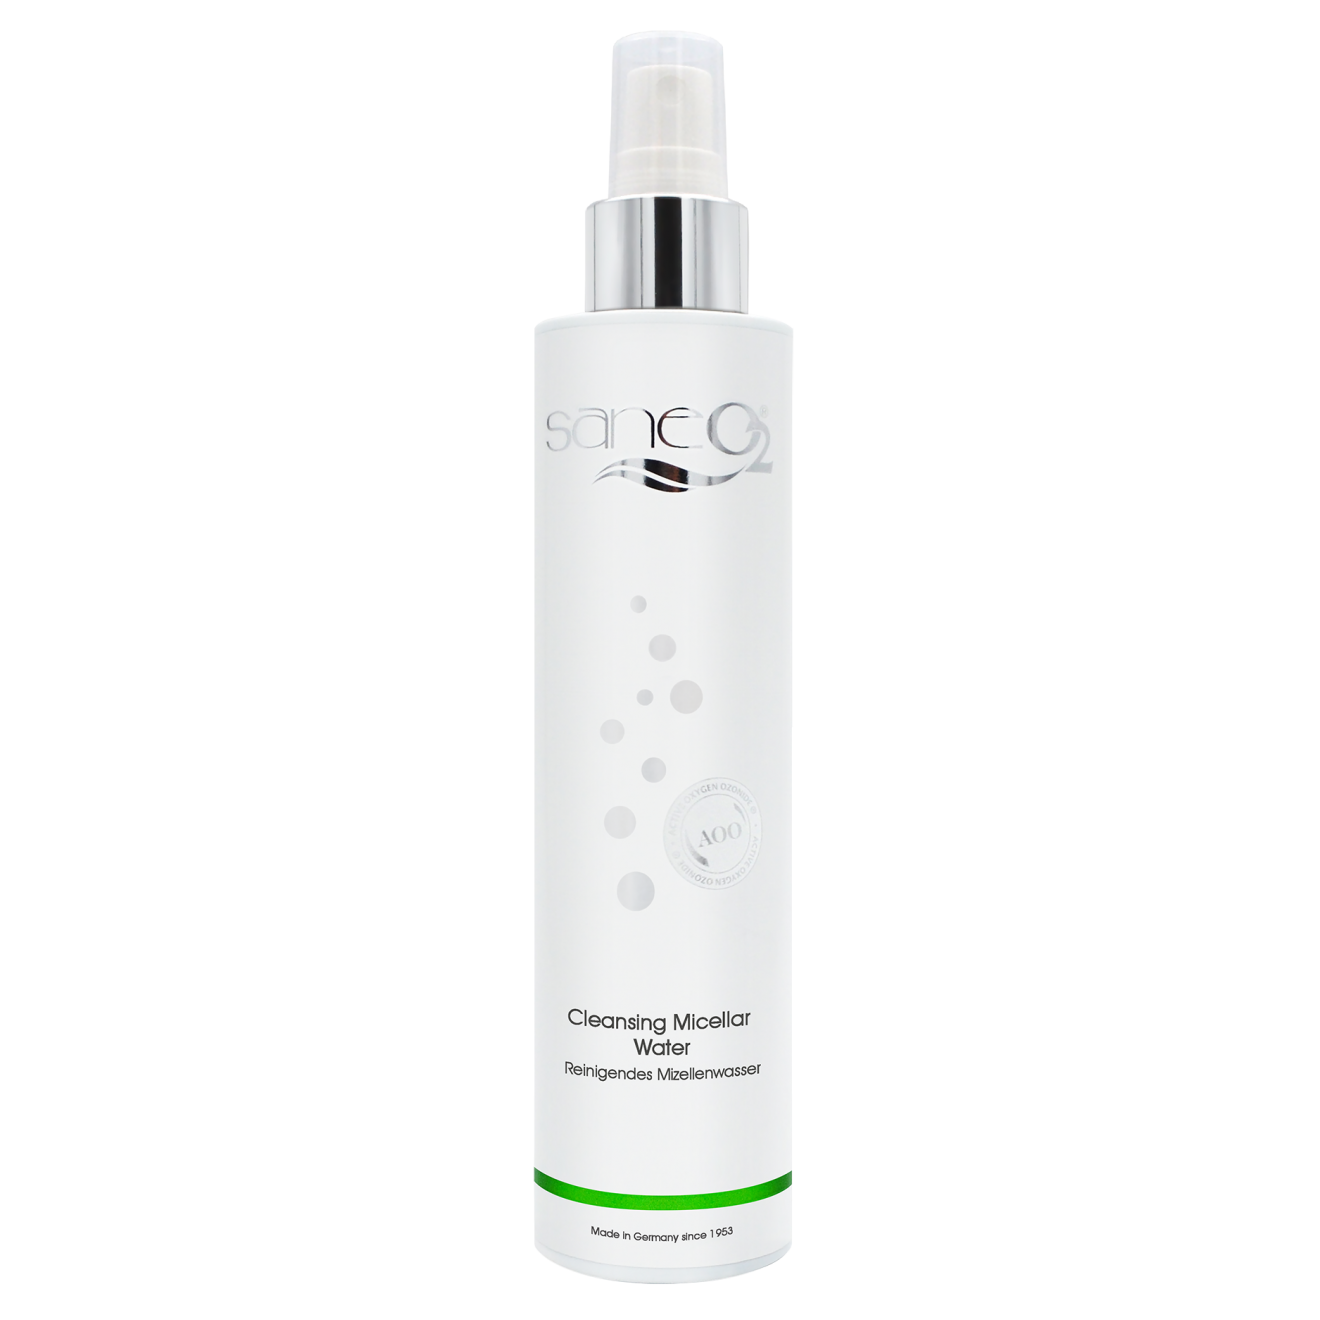 © GW nature cosmetic Cleansing Micellar Water 